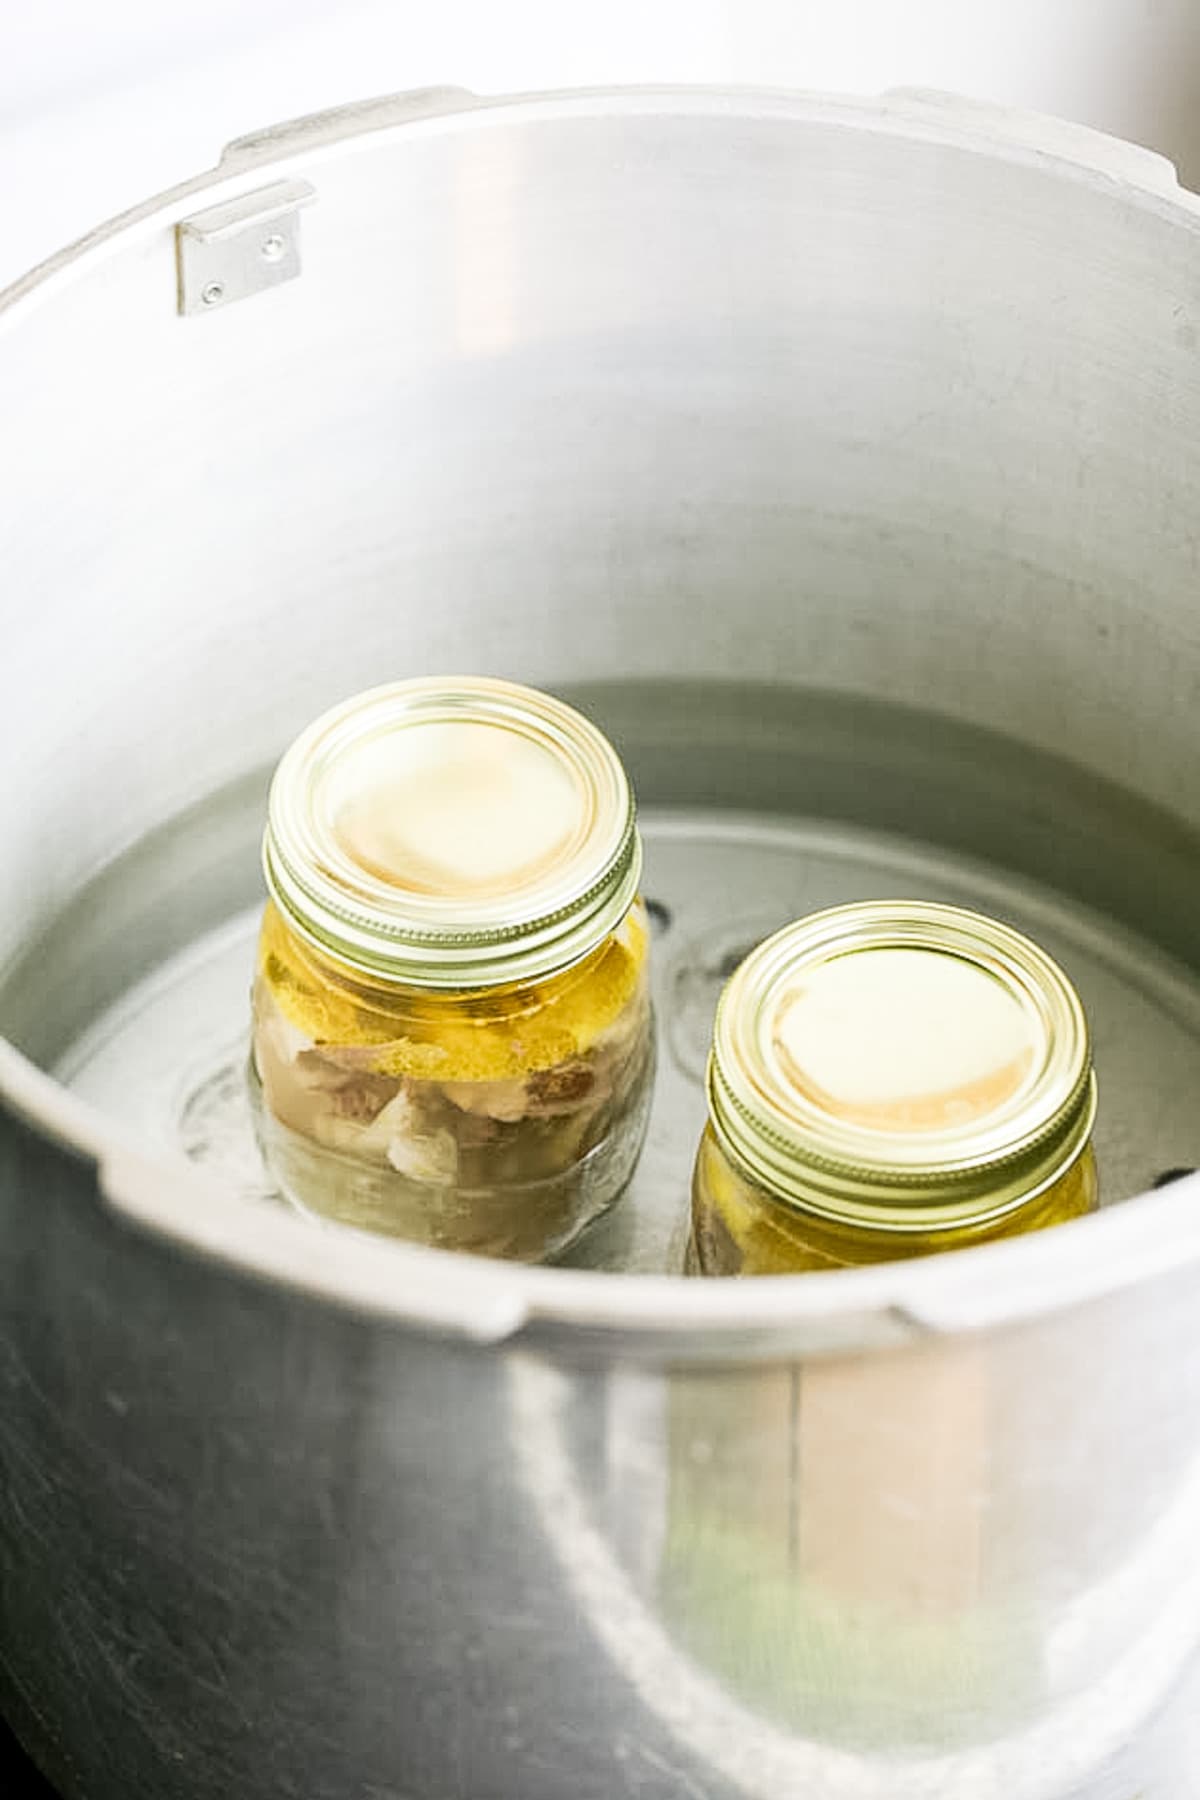 placing the jars in the pressure canner